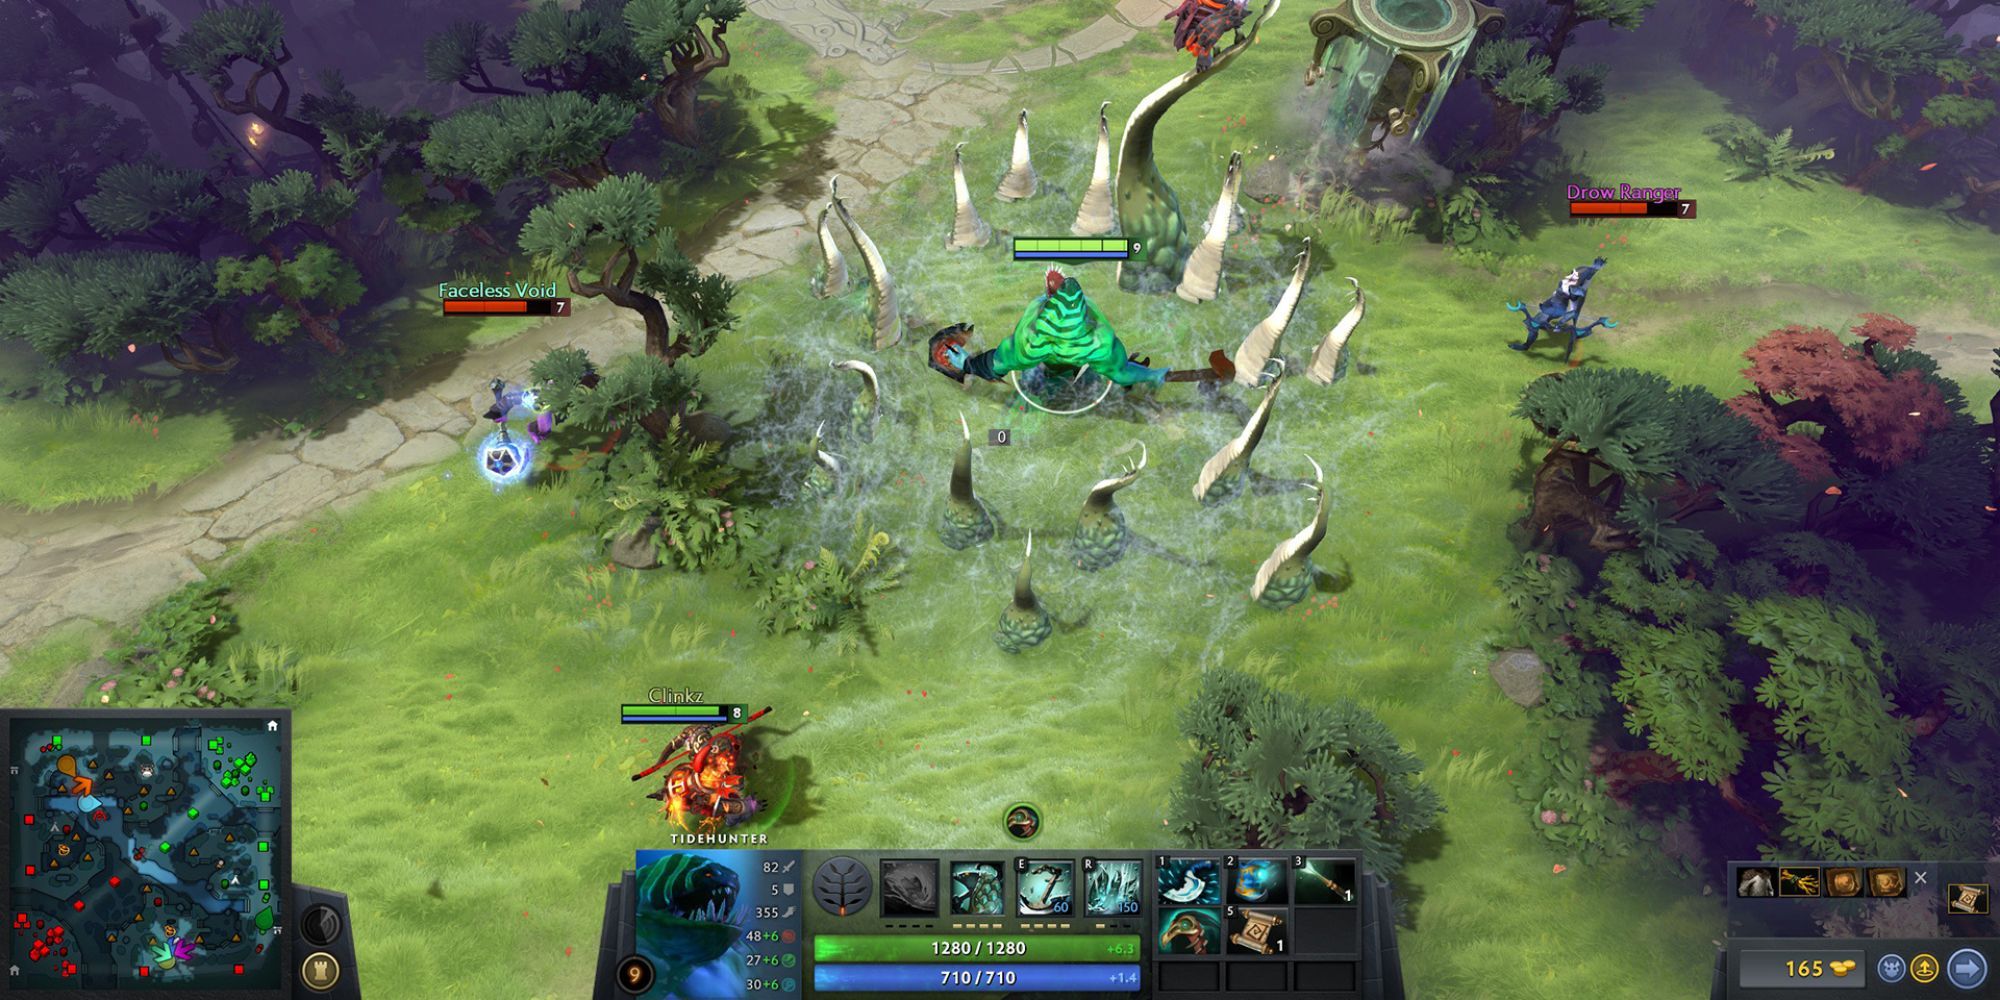 How to Improve FPS and Boost Performance in Dota 2